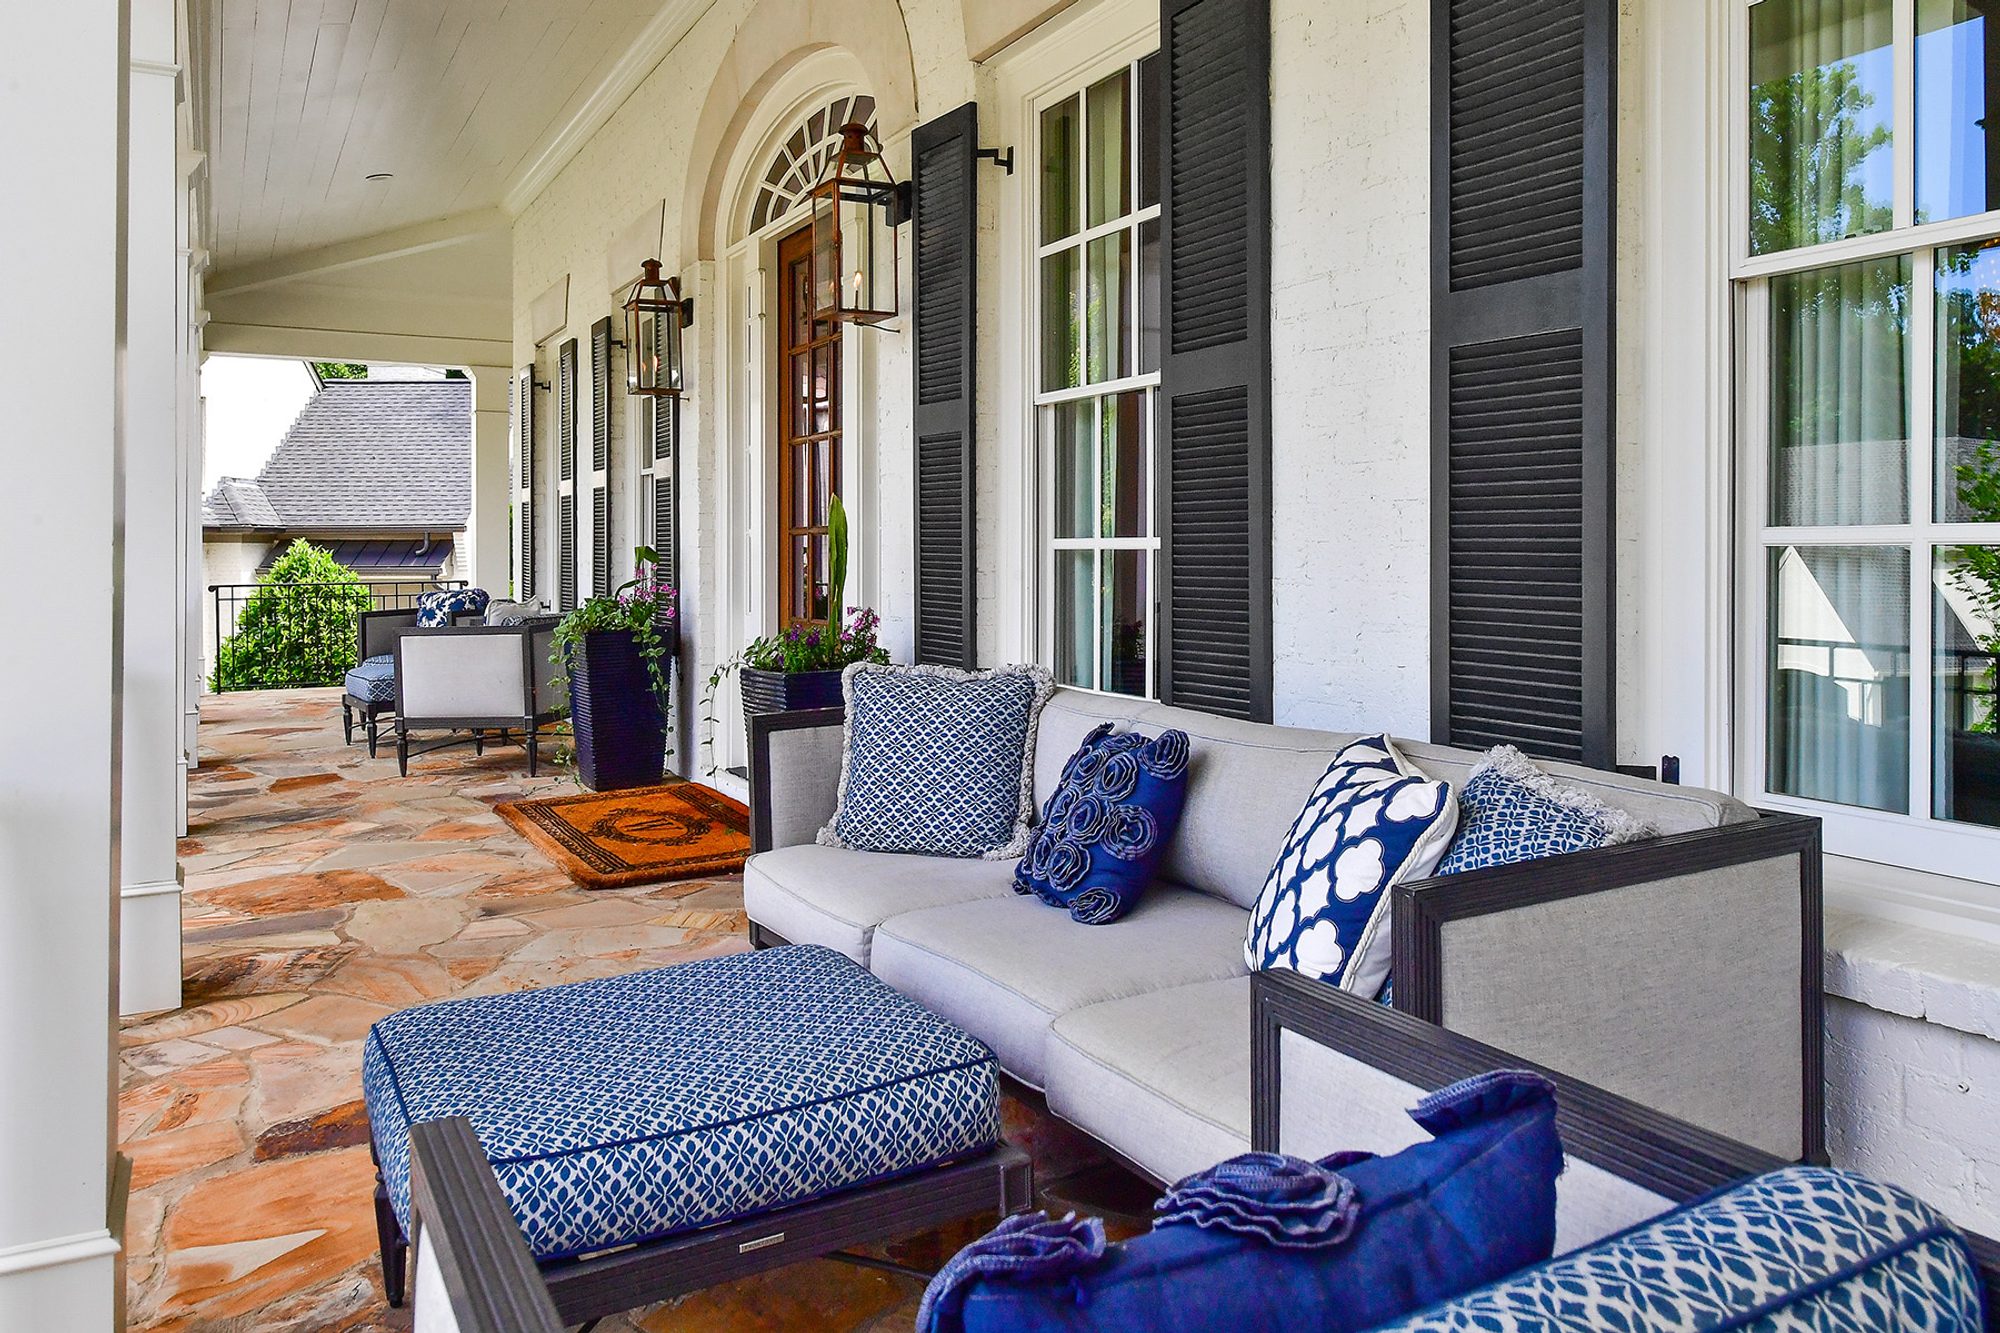 An assortment of blue indoor pillows used on the front porch furniture set.